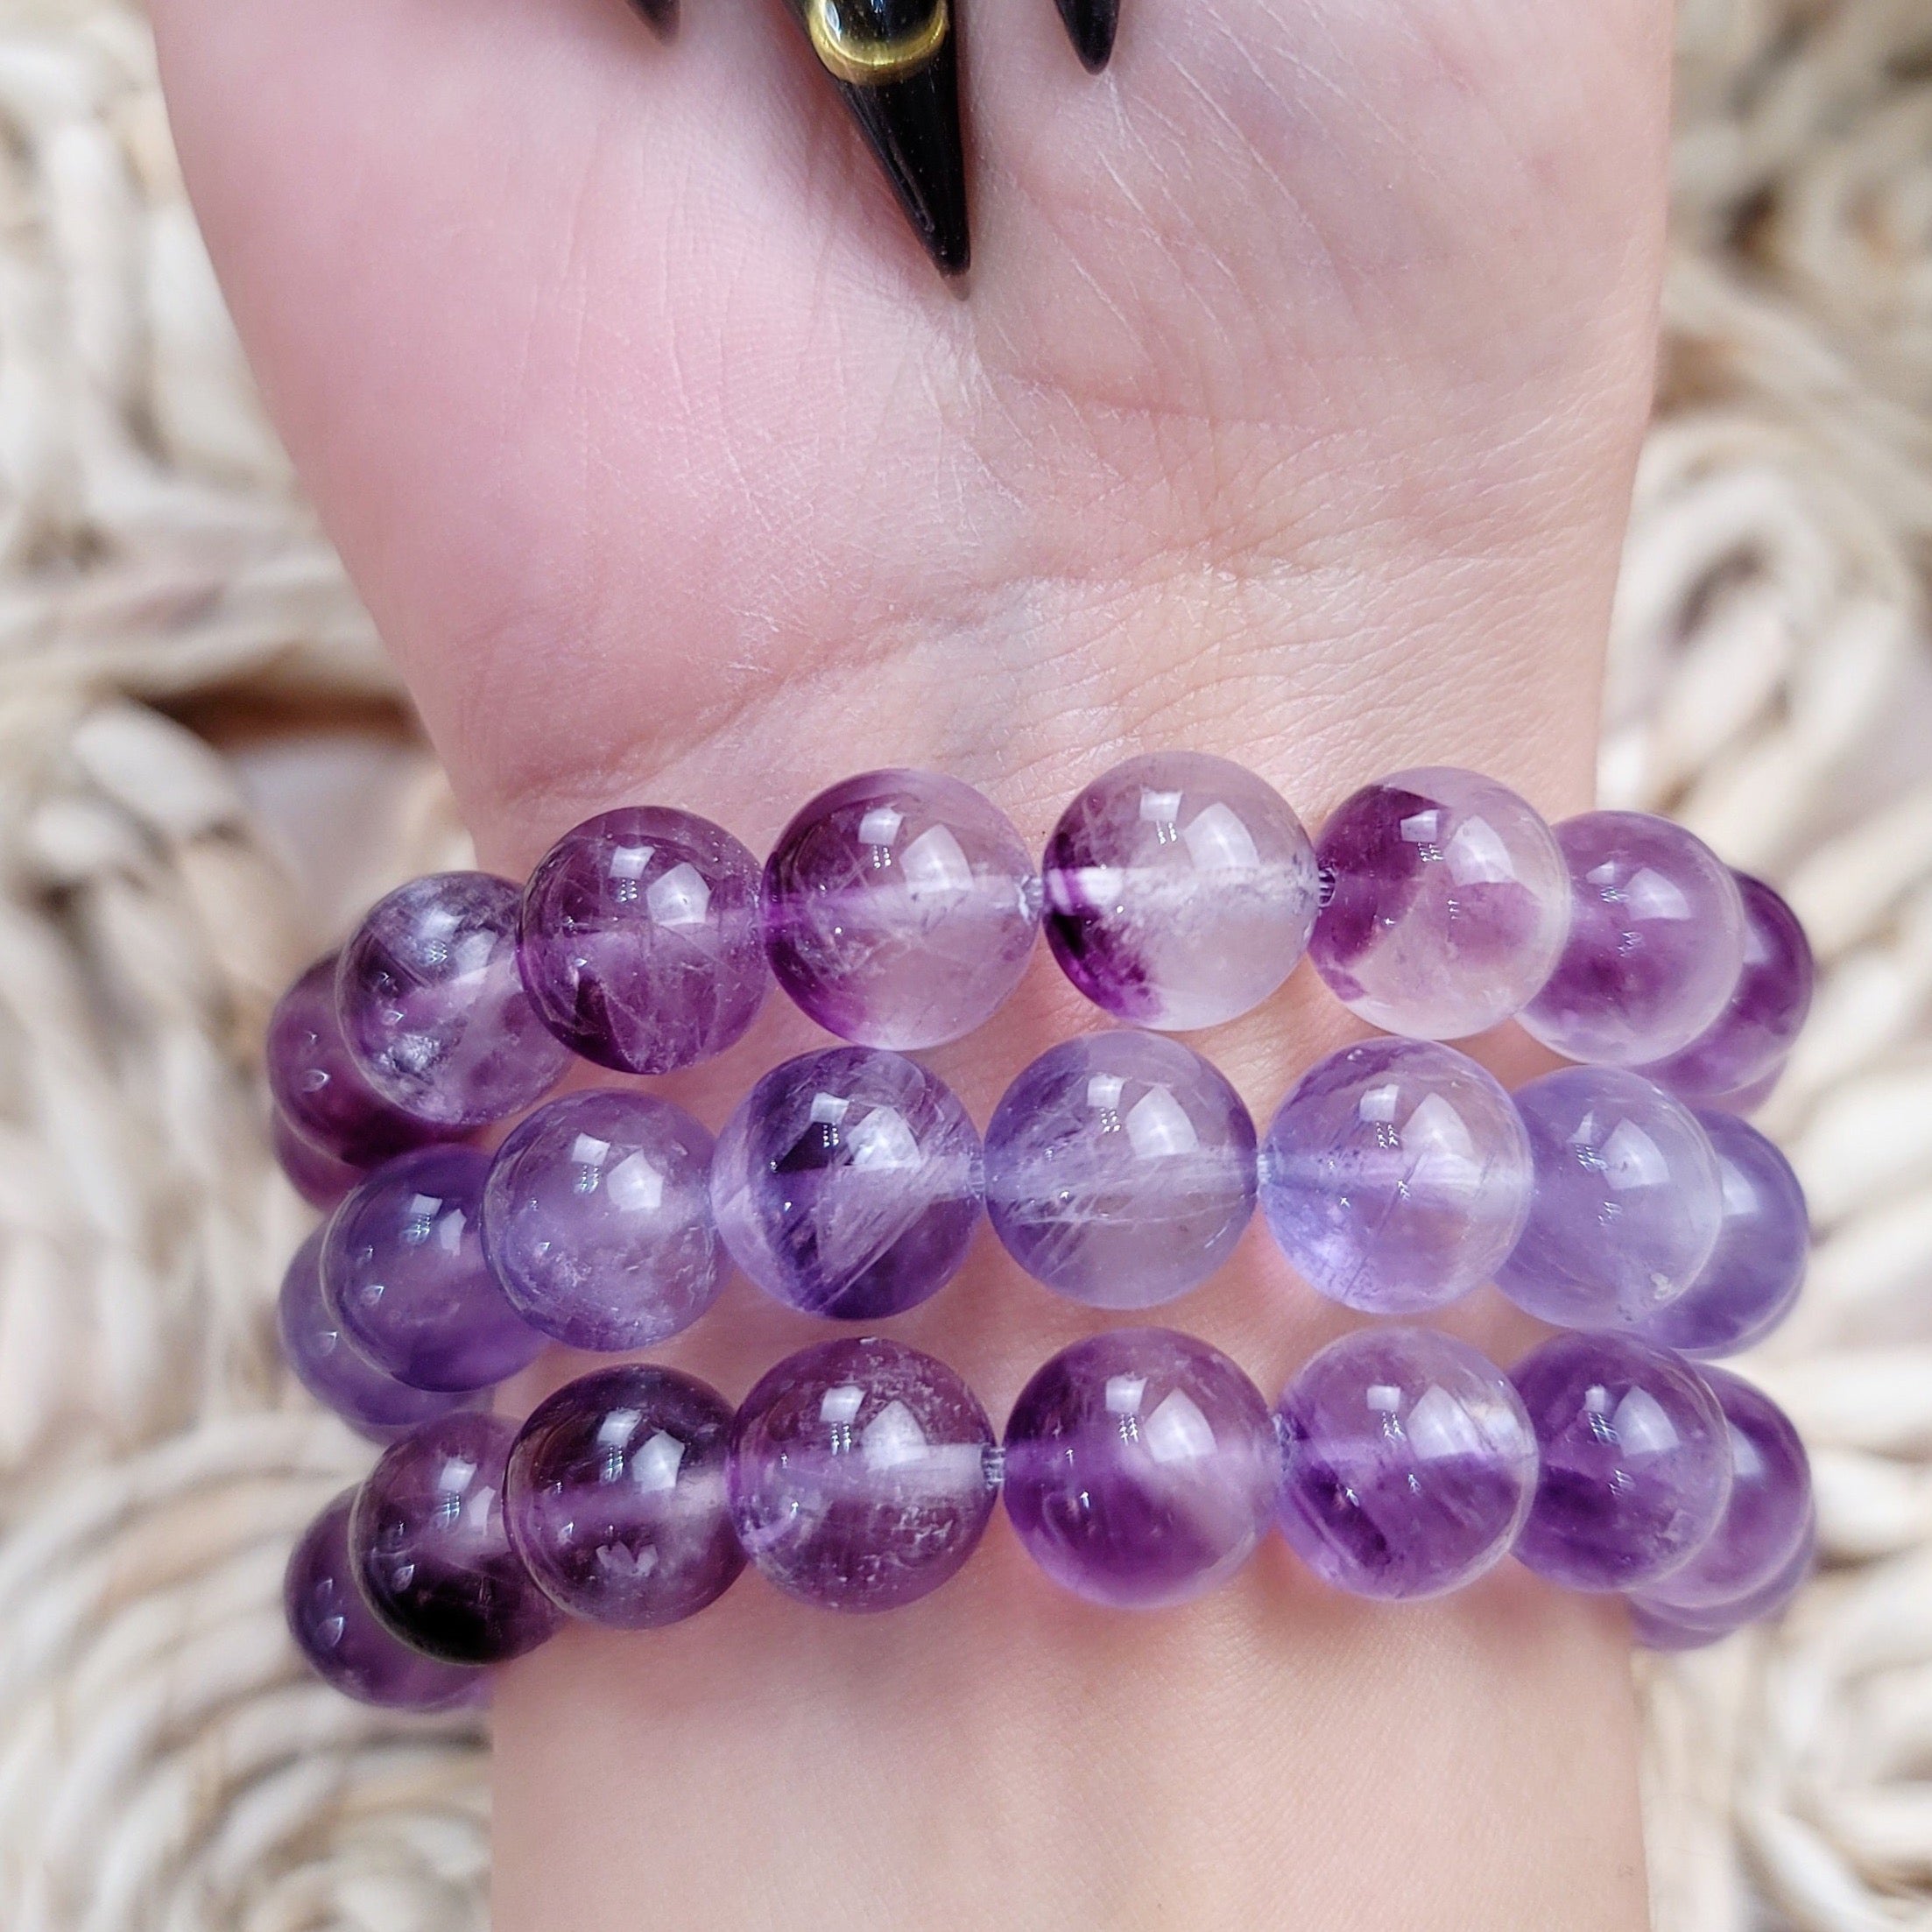 Chevron Purple Fluorite Bracelet for Focus, Intuition and Stress Relief